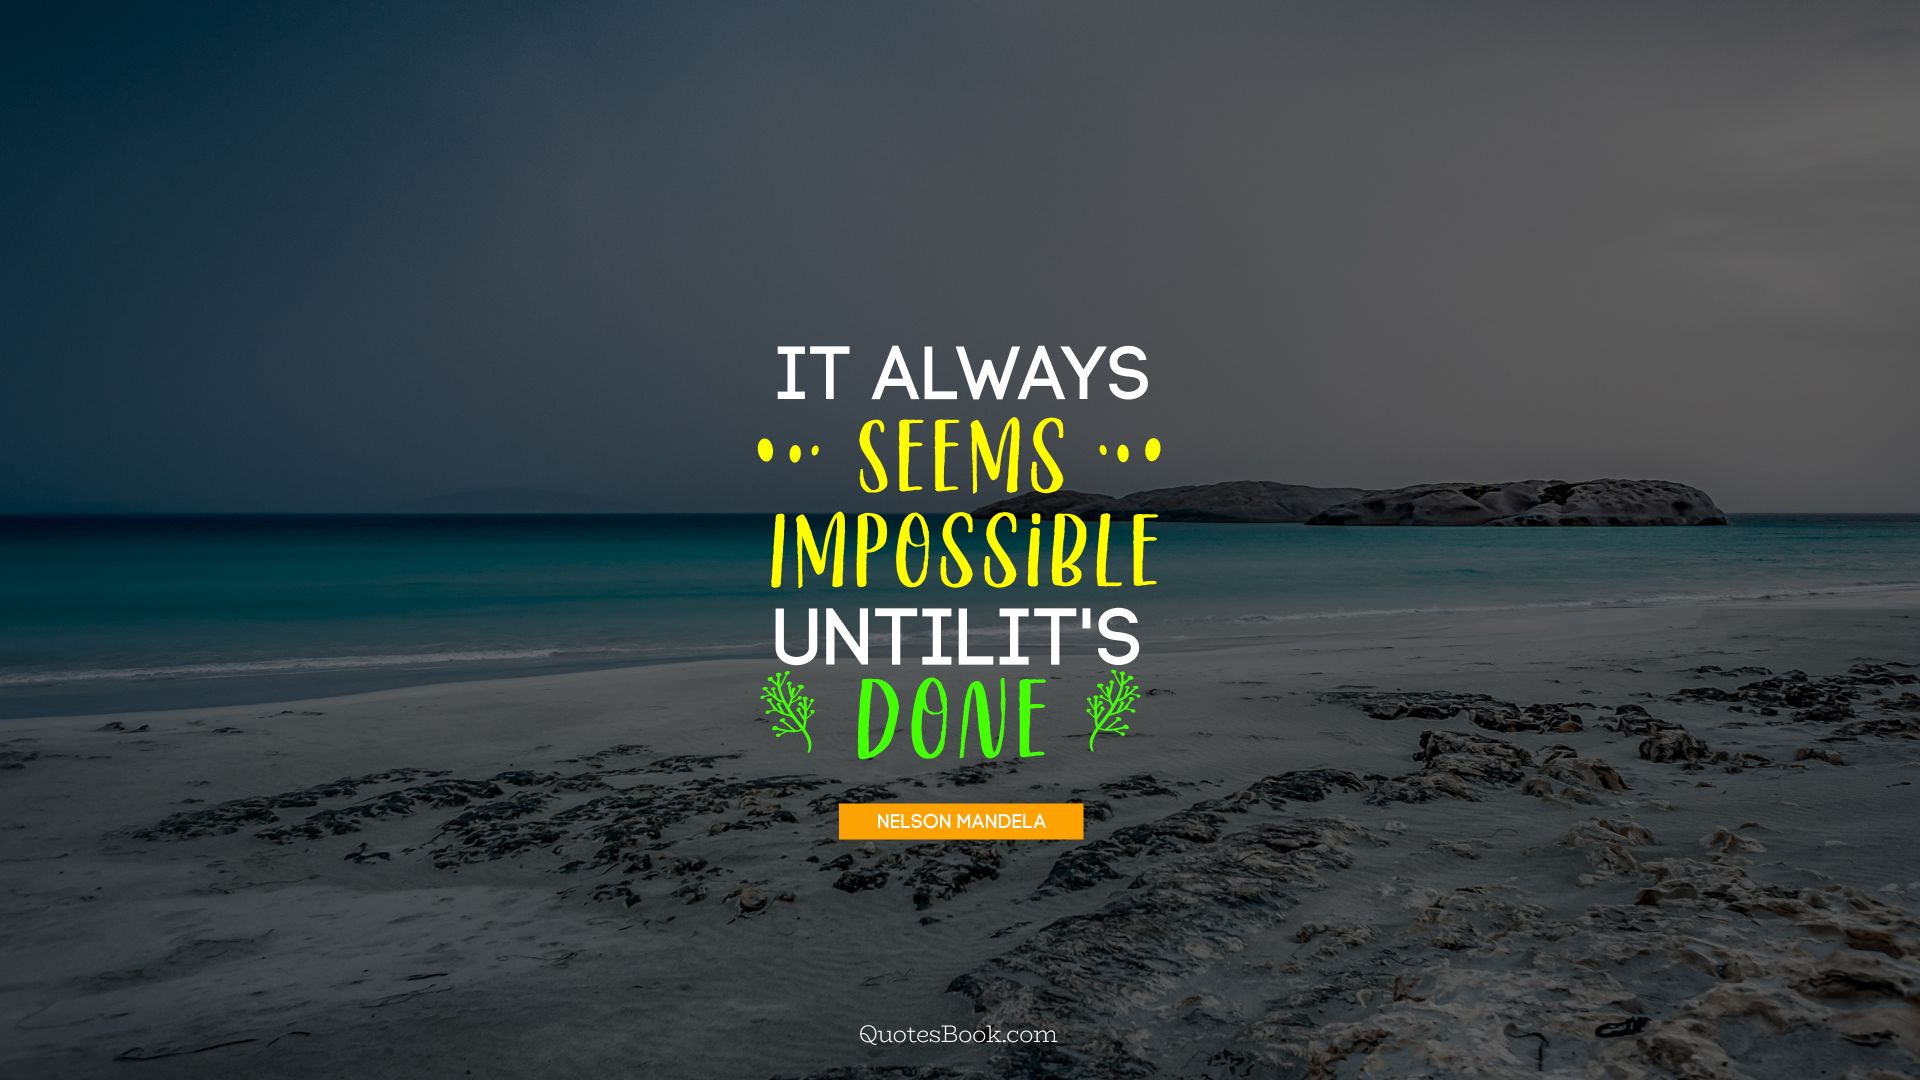 It always seems impossible until it's done nelson mandela. - Quote by Nelson Mandela